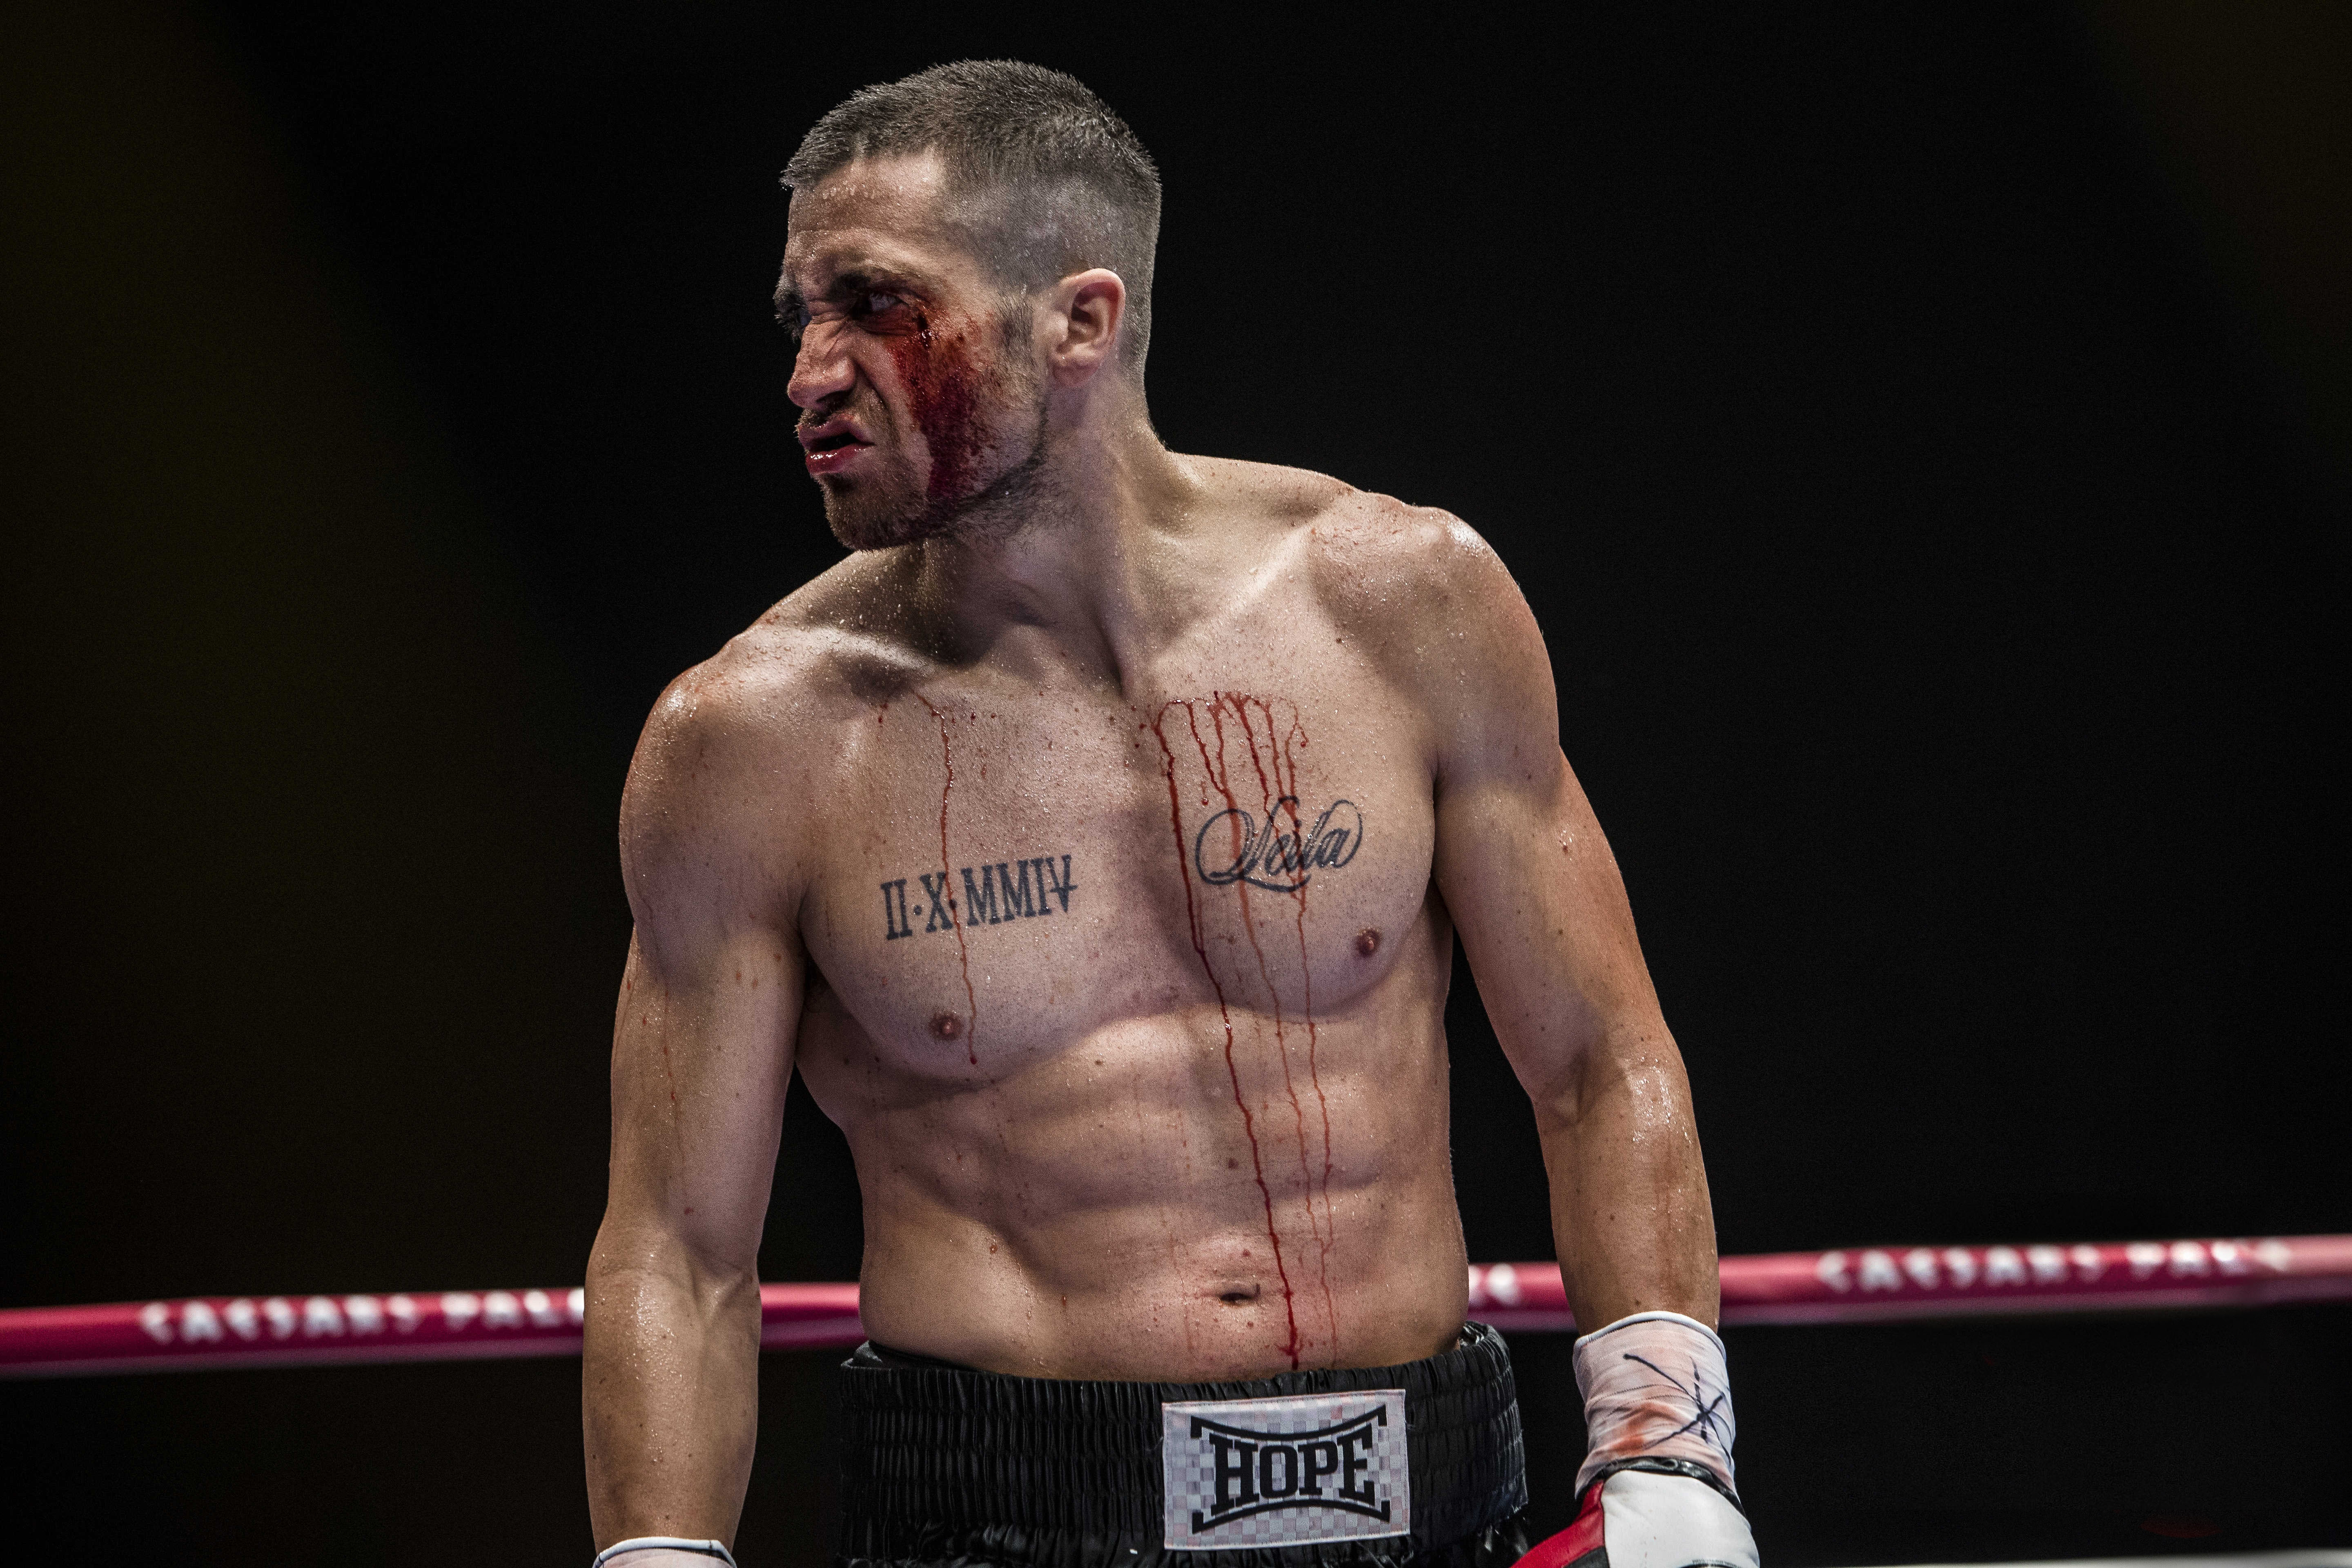 southpaw, jake gyllenhaal, movie High Definition image